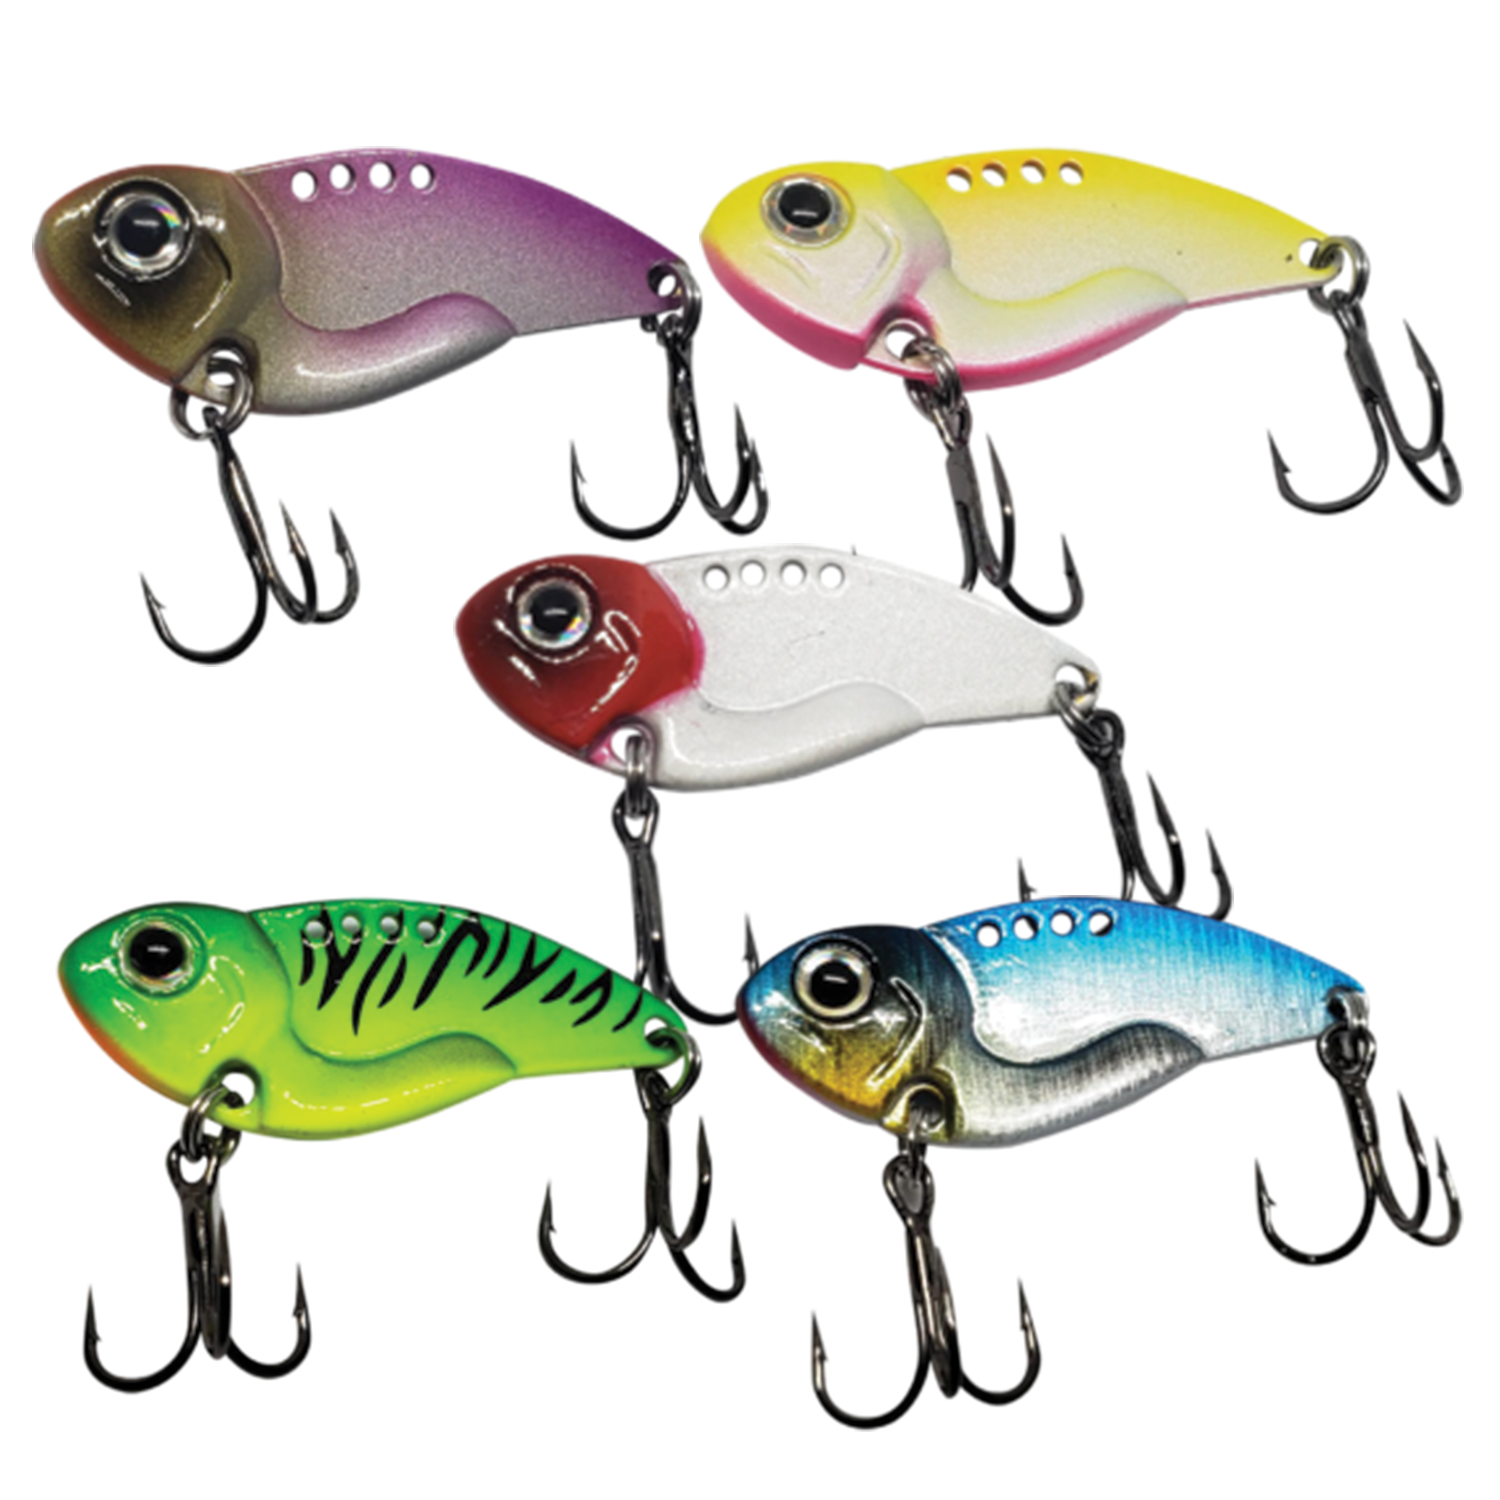 5 Pack Metal Blade Baits for Bass Fishing Lures Hard Metal VIB Fishing  Spoons Crankbaits Swimbaits for Trout Walleye Crappie Saltwater Blade Bait